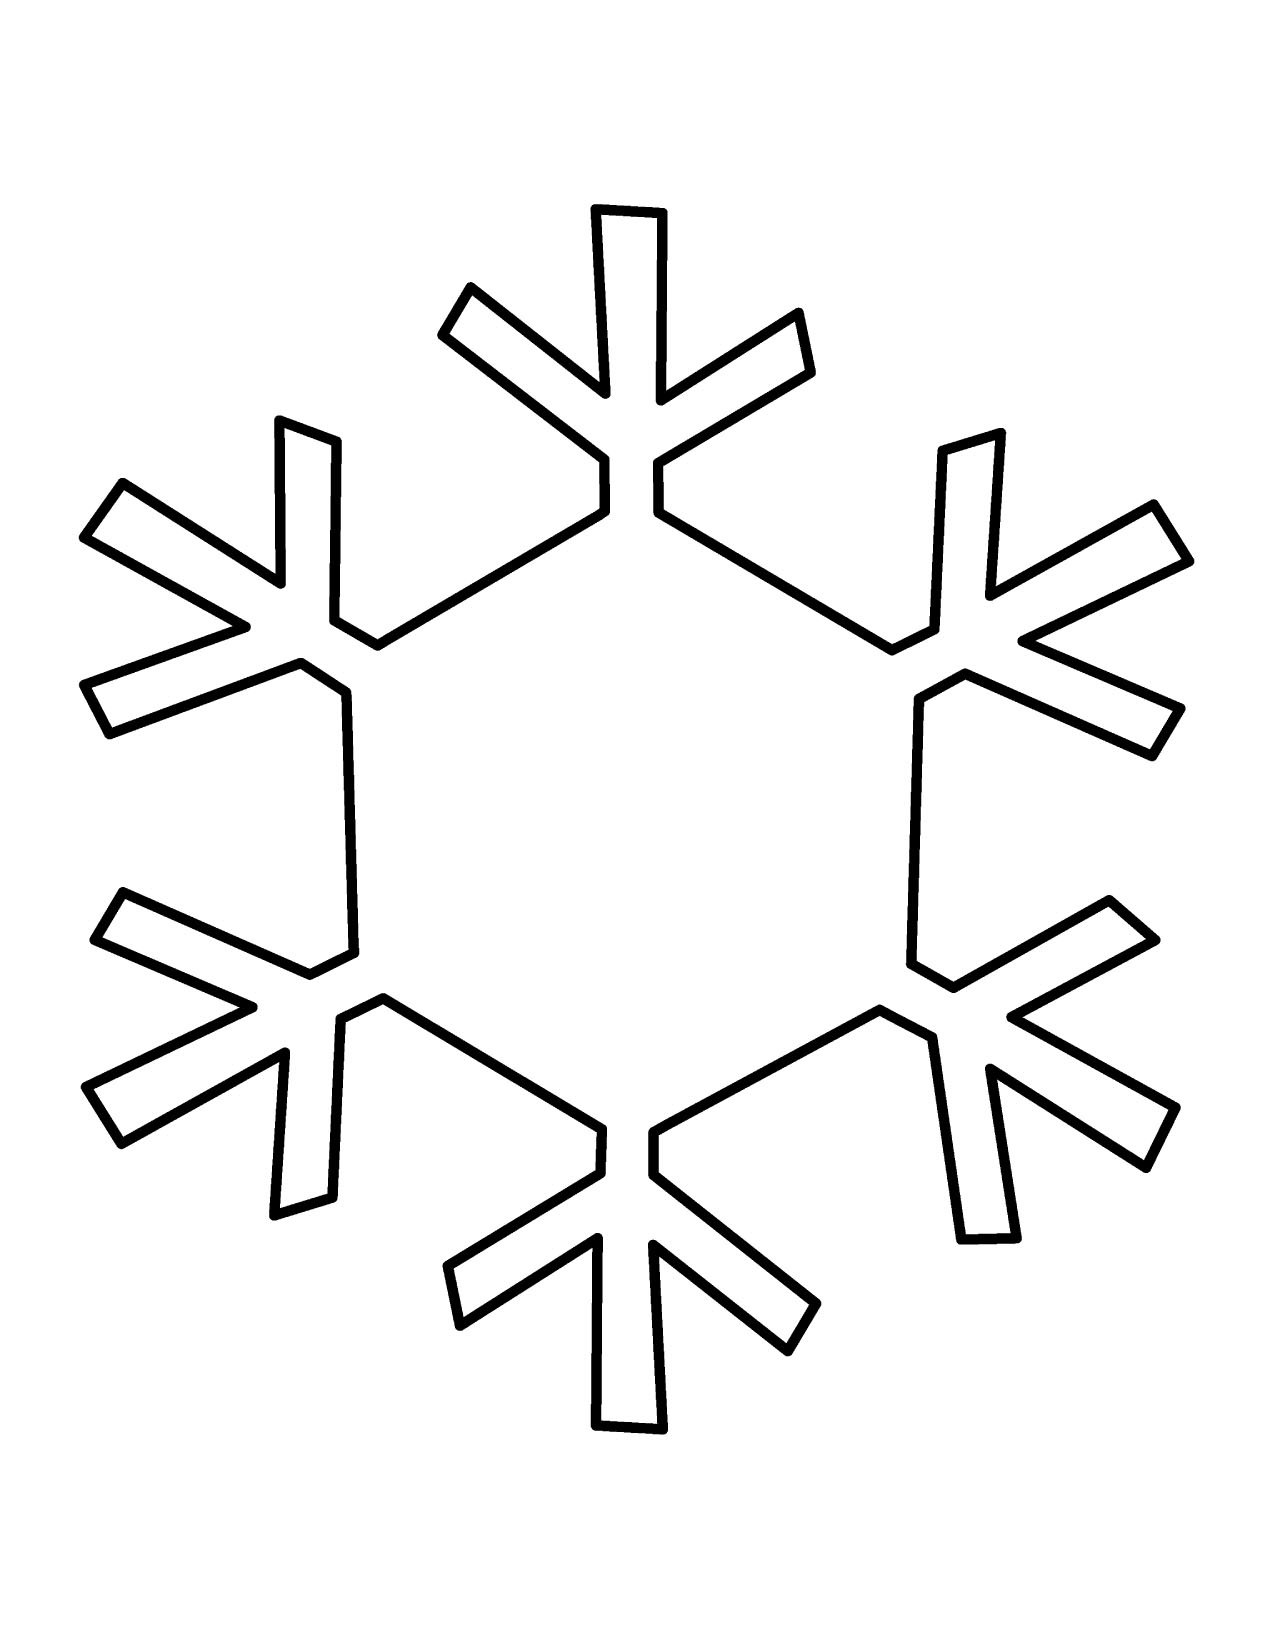 Snowflake Clip Art Free Download - Clipart library